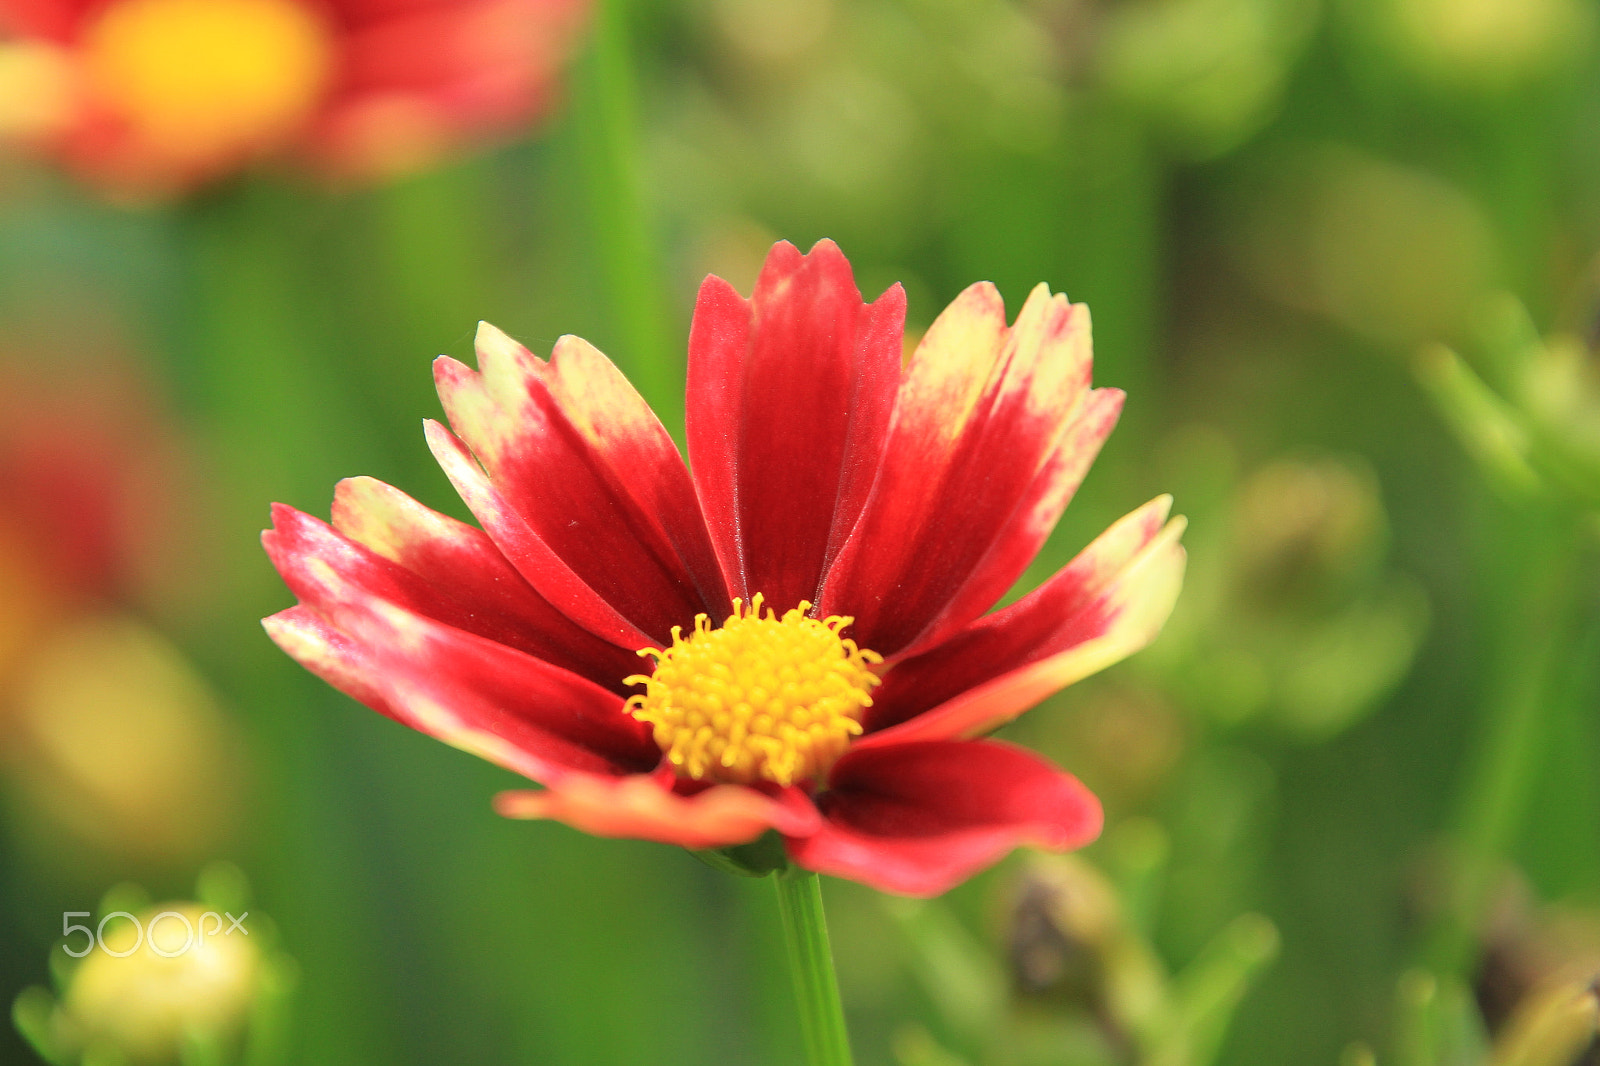 Canon EOS 7D + Tamron 16-300mm F3.5-6.3 Di II VC PZD Macro sample photo. Red flower white tips yellow center photography